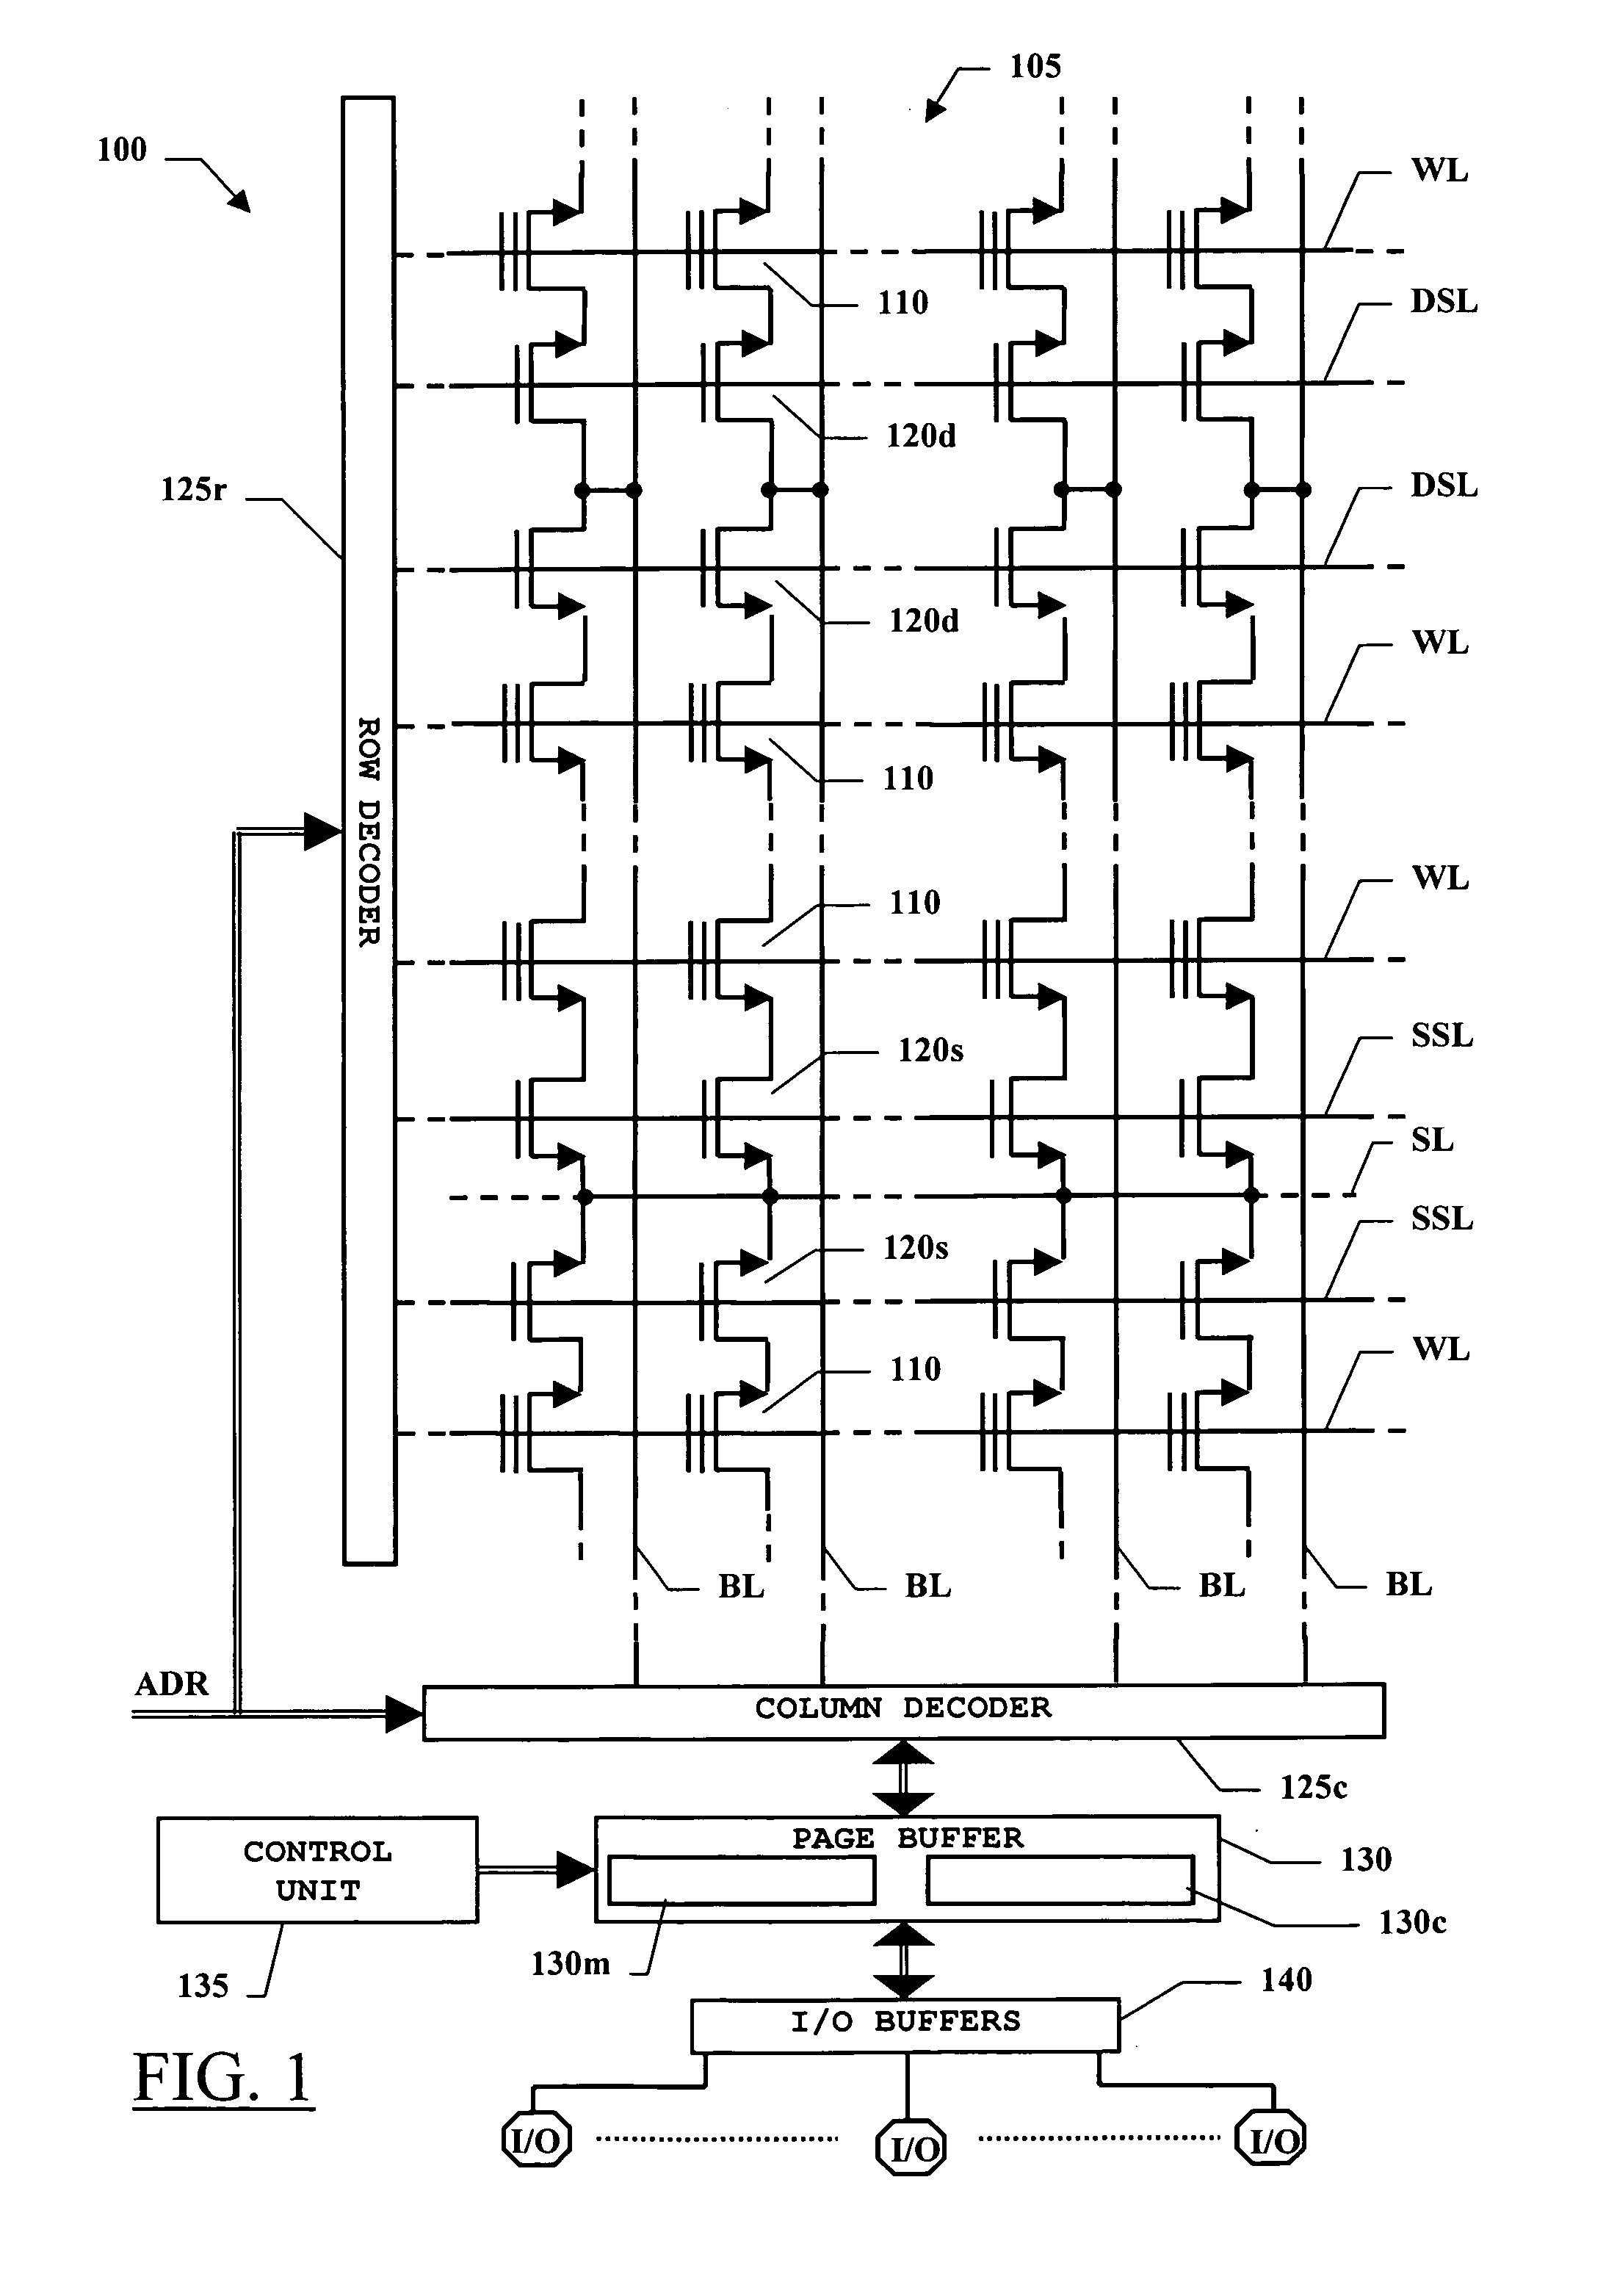 Page buffer for a programmable memory device